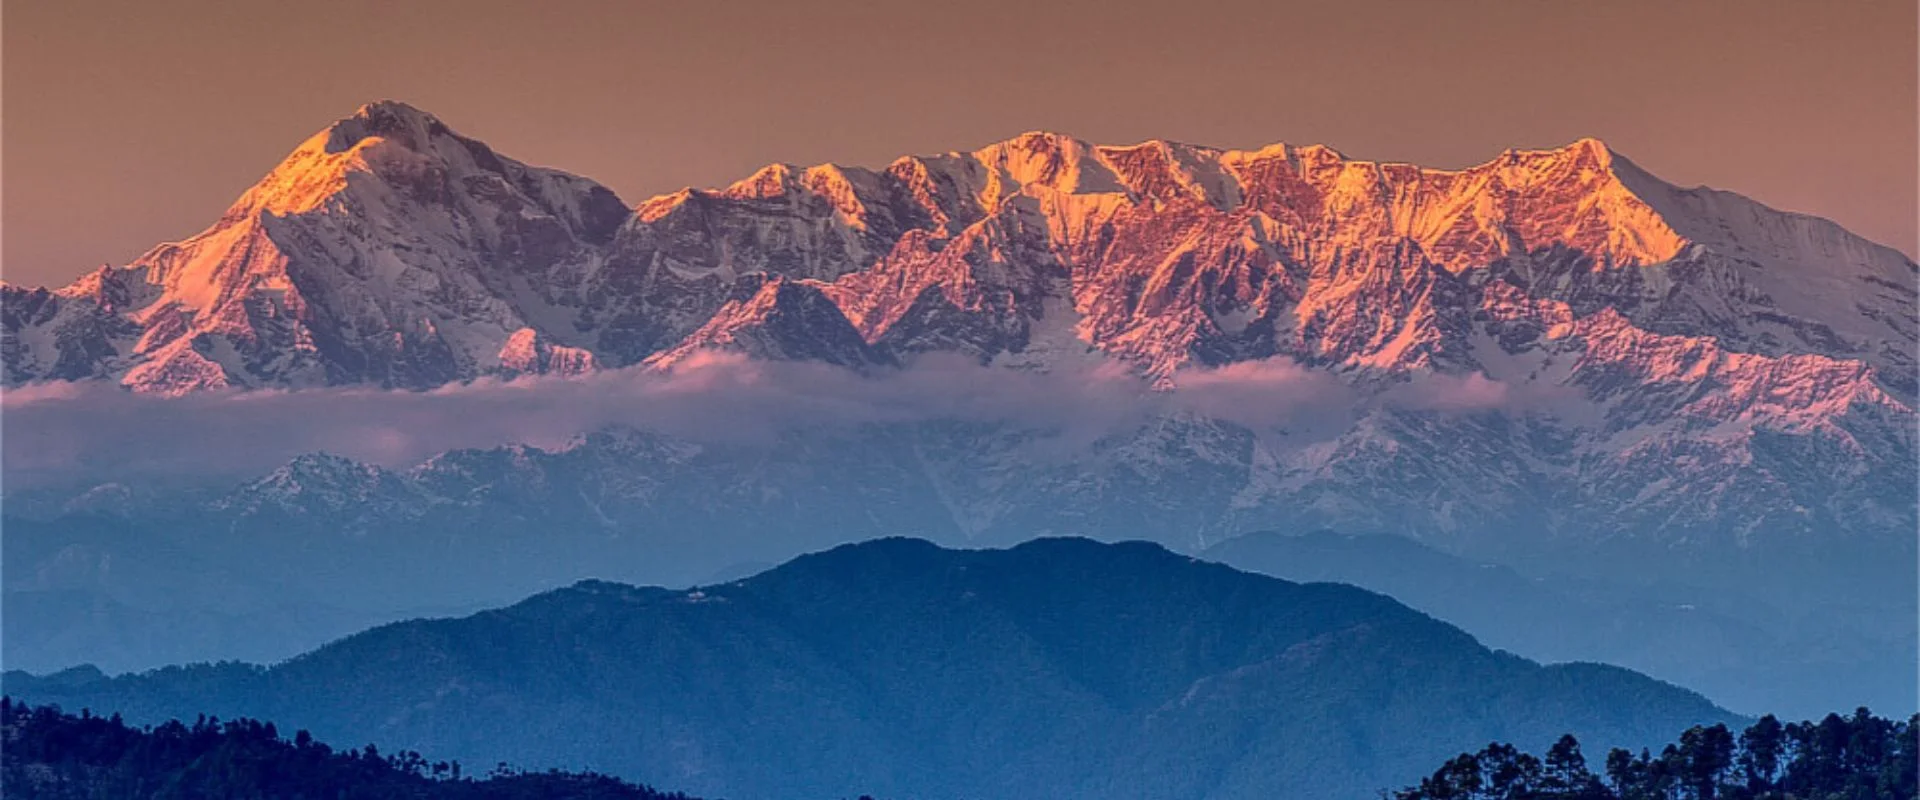 Overlooking the Himalayas